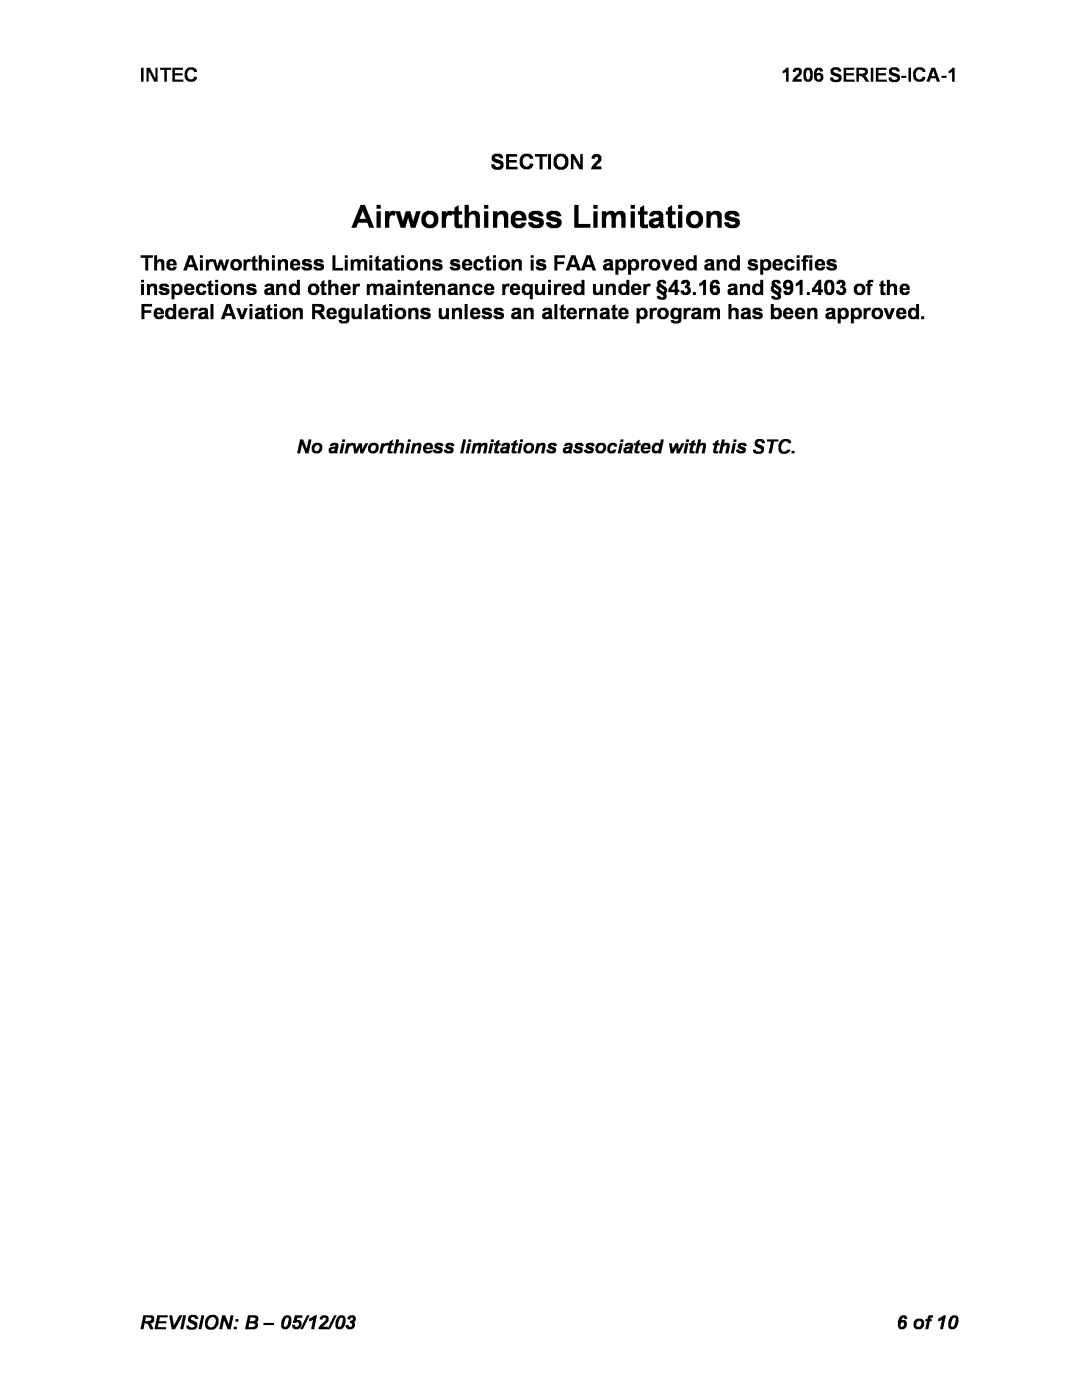 Intec STC SR00180SE manual Airworthiness Limitations, Section 